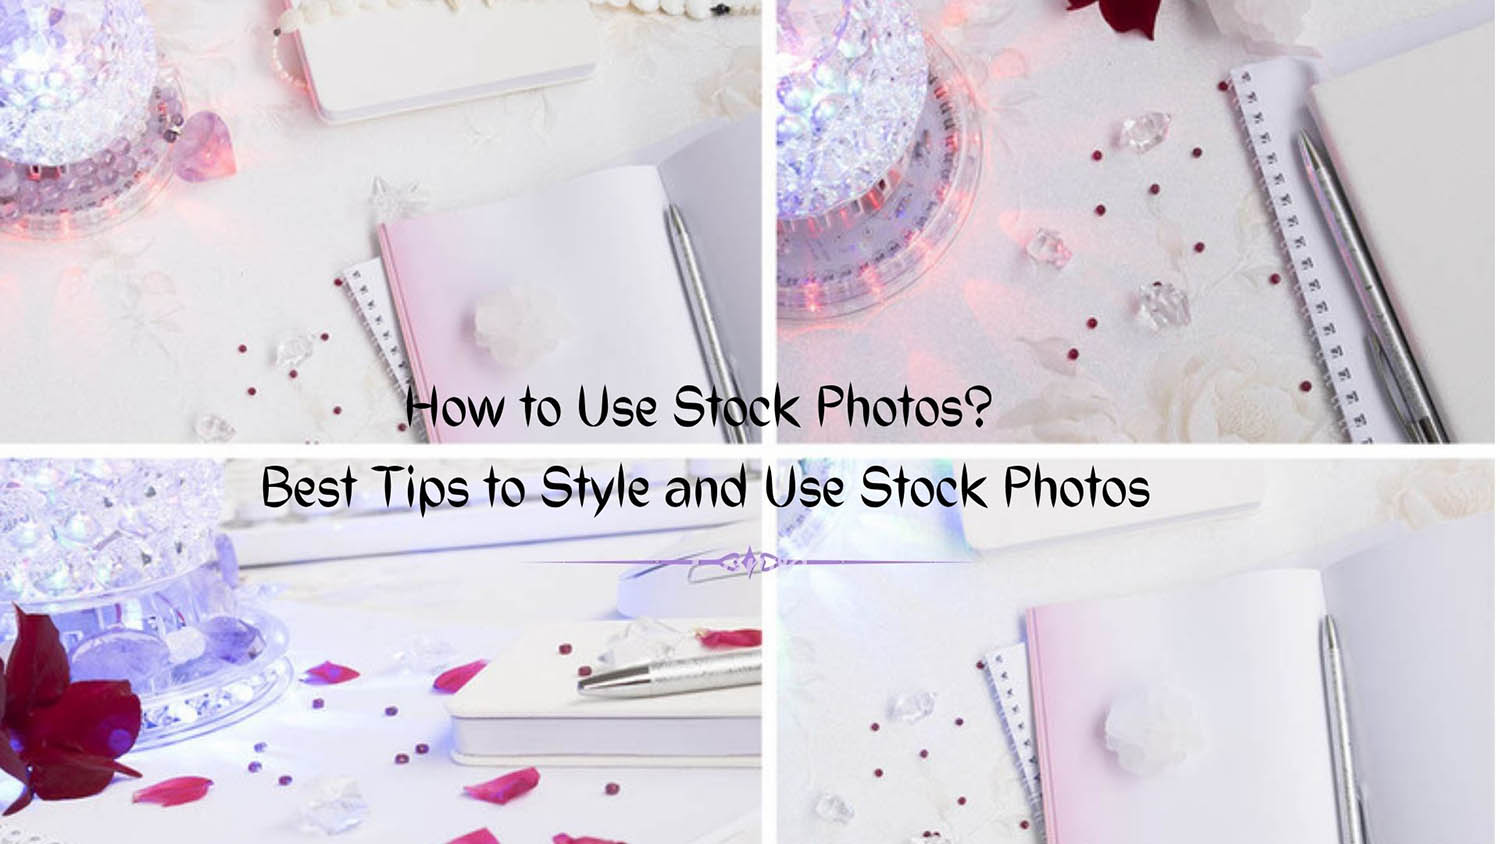 Styled Stock Photography Tutorial – How to Use Stock Photos on a Website?